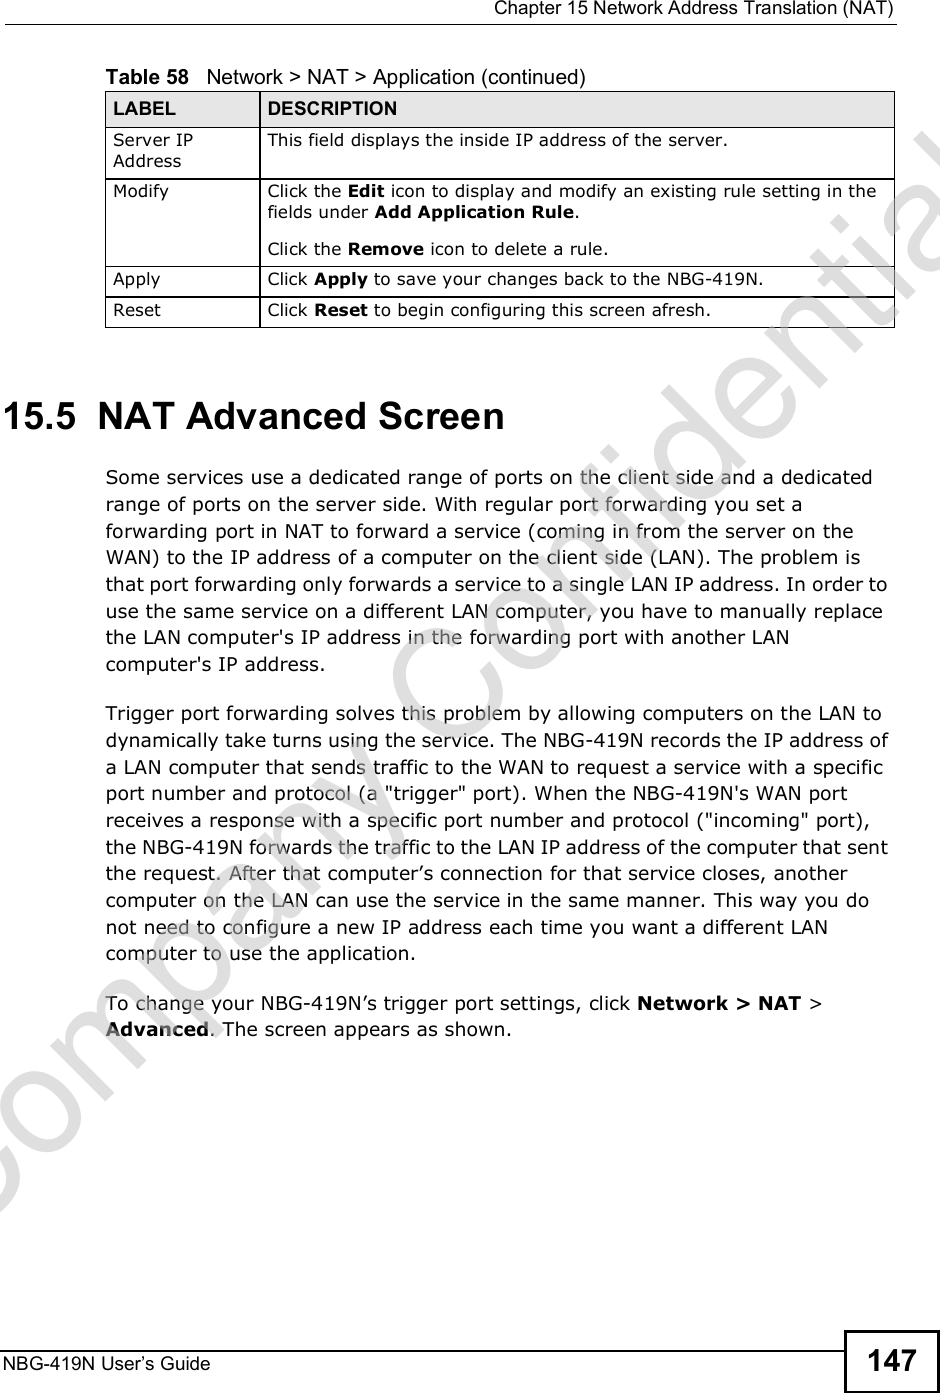  Chapter 15Network Address Translation (NAT)NBG-419N User s Guide 14715.5  NAT Advanced ScreenSome services use a dedicated range of ports on the client side and a dedicated range of ports on the server side. With regular port forwarding you set a forwarding port in NAT to forward a service (coming in from the server on the WAN) to the IP address of a computer on the client side (LAN). The problem is that port forwarding only forwards a service to a single LAN IP address. In order to use the same service on a different LAN computer, you have to manually replace the LAN computer&apos;s IP address in the forwarding port with another LAN computer&apos;s IP address. Trigger port forwarding solves this problem by allowing computers on the LAN to dynamically take turns using the service. The NBG-419N records the IP address of a LAN computer that sends traffic to the WAN to request a service with a specific port number and protocol (a &quot;trigger&quot; port). When the NBG-419N&apos;s WAN port receives a response with a specific port number and protocol (&quot;incoming&quot; port), the NBG-419N forwards the traffic to the LAN IP address of the computer that sent the request. After that computer!s connection for that service closes, another computer on the LAN can use the service in the same manner. This way you do not need to configure a new IP address each time you want a different LAN computer to use the application.To change your NBG-419N!s trigger port settings, click Network &gt; NAT &gt; Advanced. The screen appears as shown.Server IP AddressThis field displays the inside IP address of the server.Modify Click the Edit icon to display and modify an existing rule setting in the fields under Add Application Rule. Click the Remove icon to delete a rule.Apply Click Apply to save your changes back to the NBG-419N.Reset Click Reset to begin configuring this screen afresh.Table 58   Network &gt; NAT &gt; Application (continued)LABEL DESCRIPTIONCompany Confidential